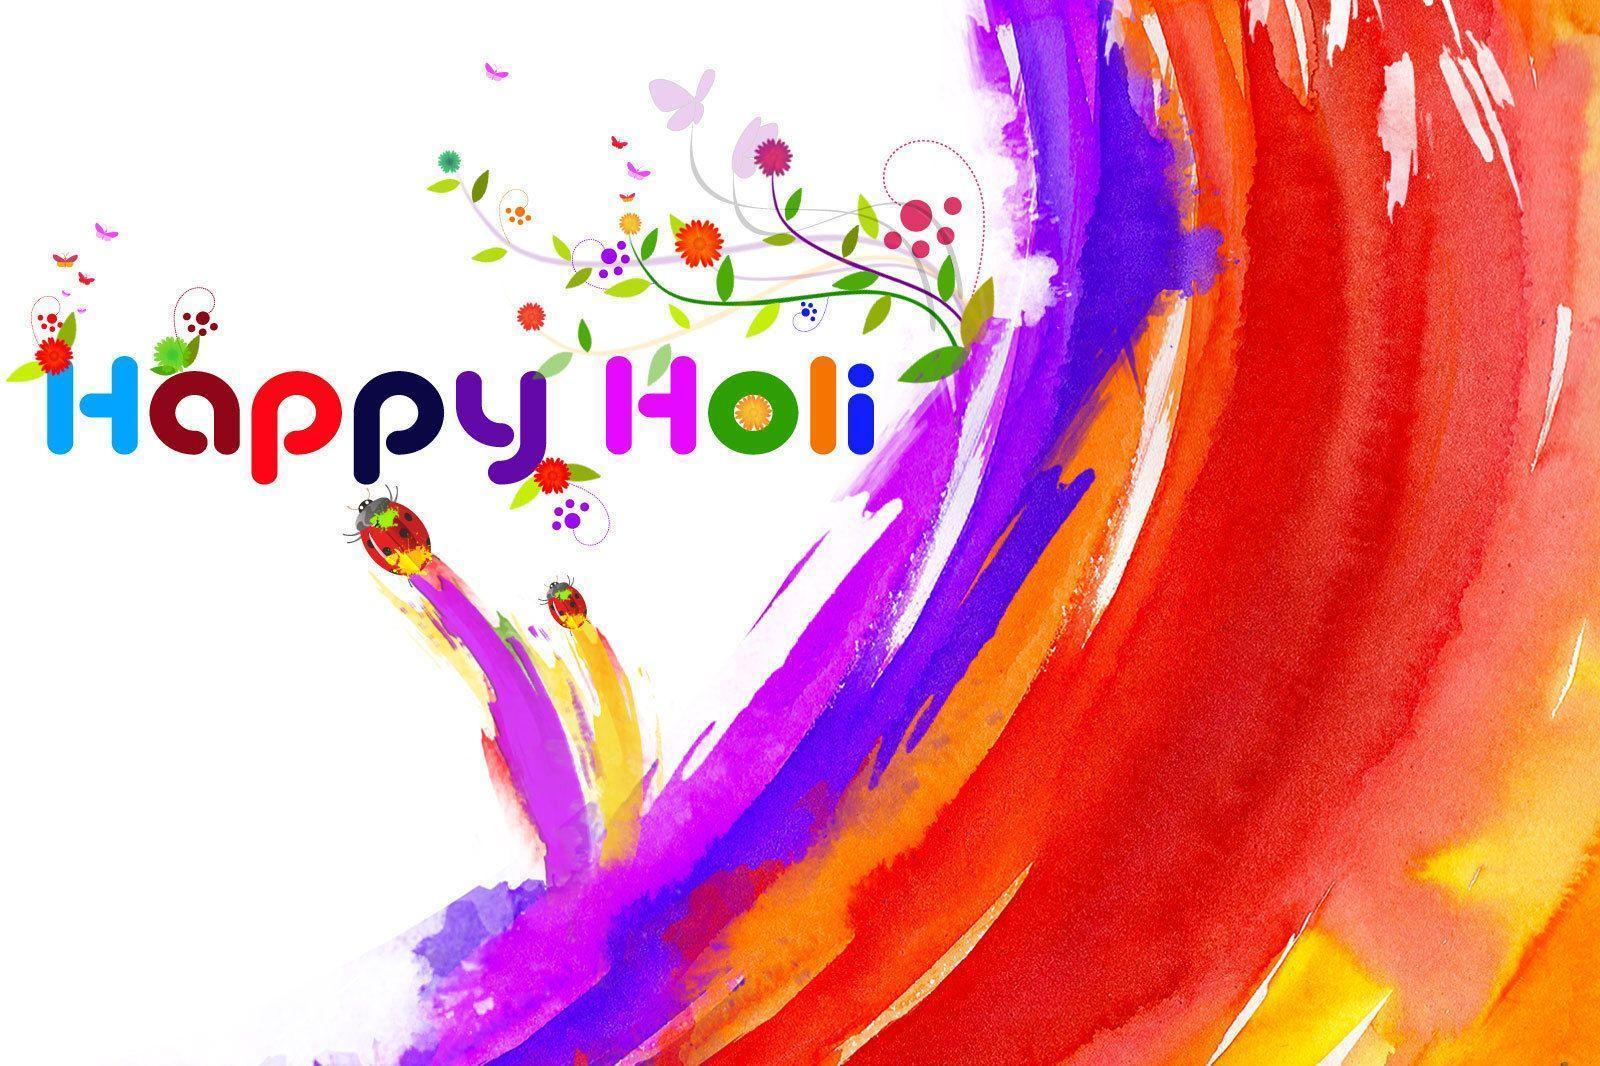 Happy Holi Photos Image Pictures & Wallpapers For Everyone